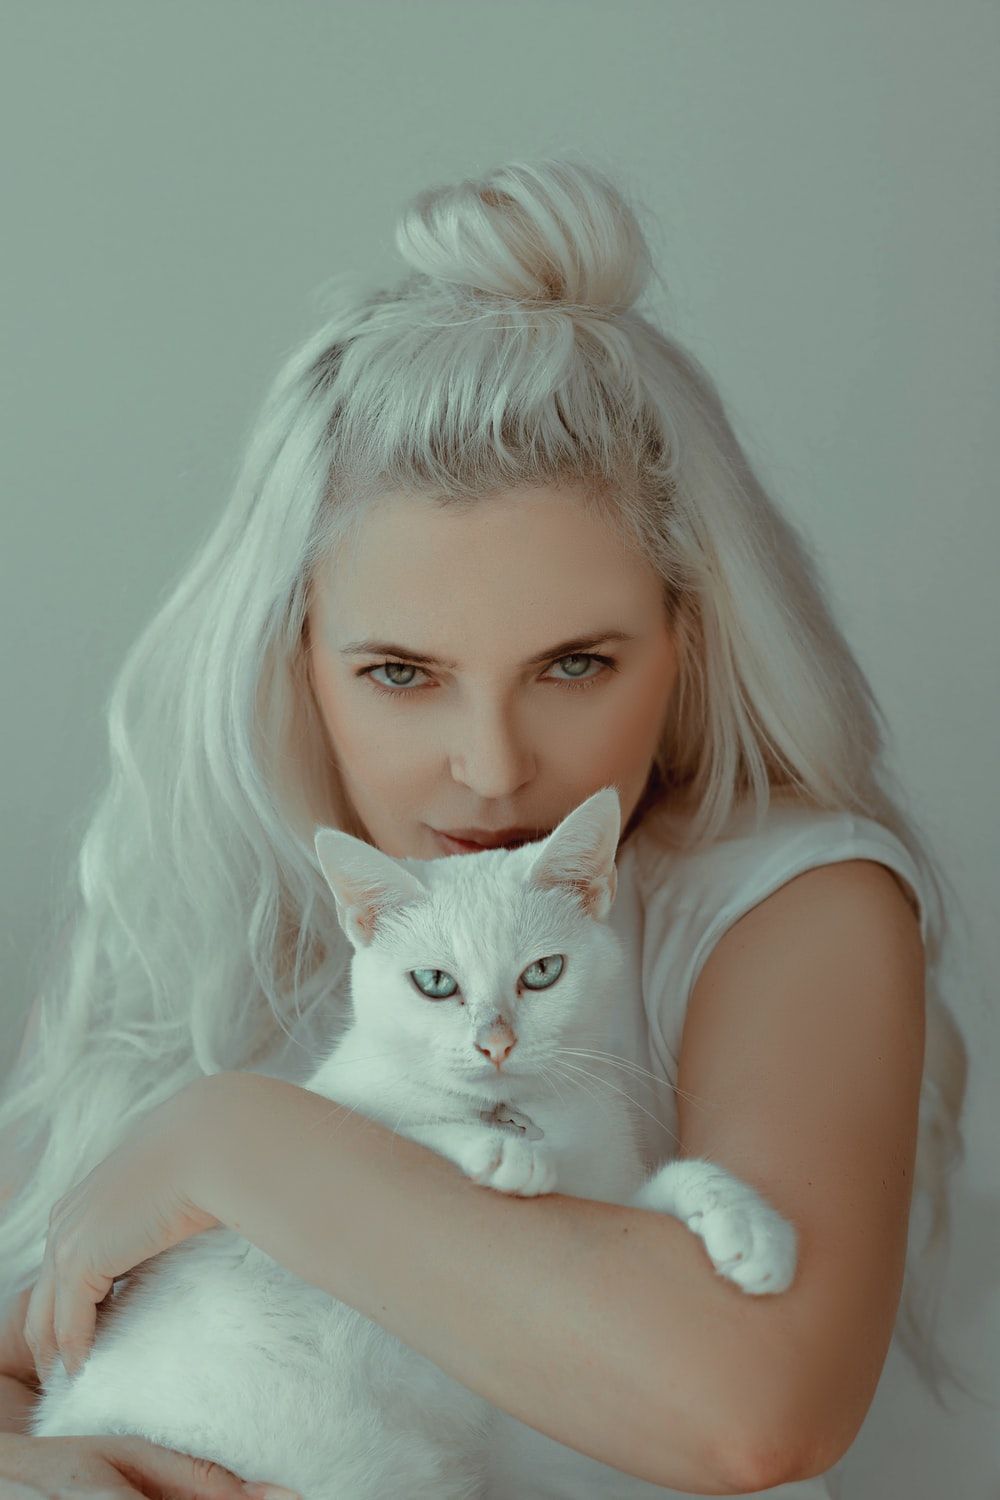 Girl And Cat Picture. Download Free Image